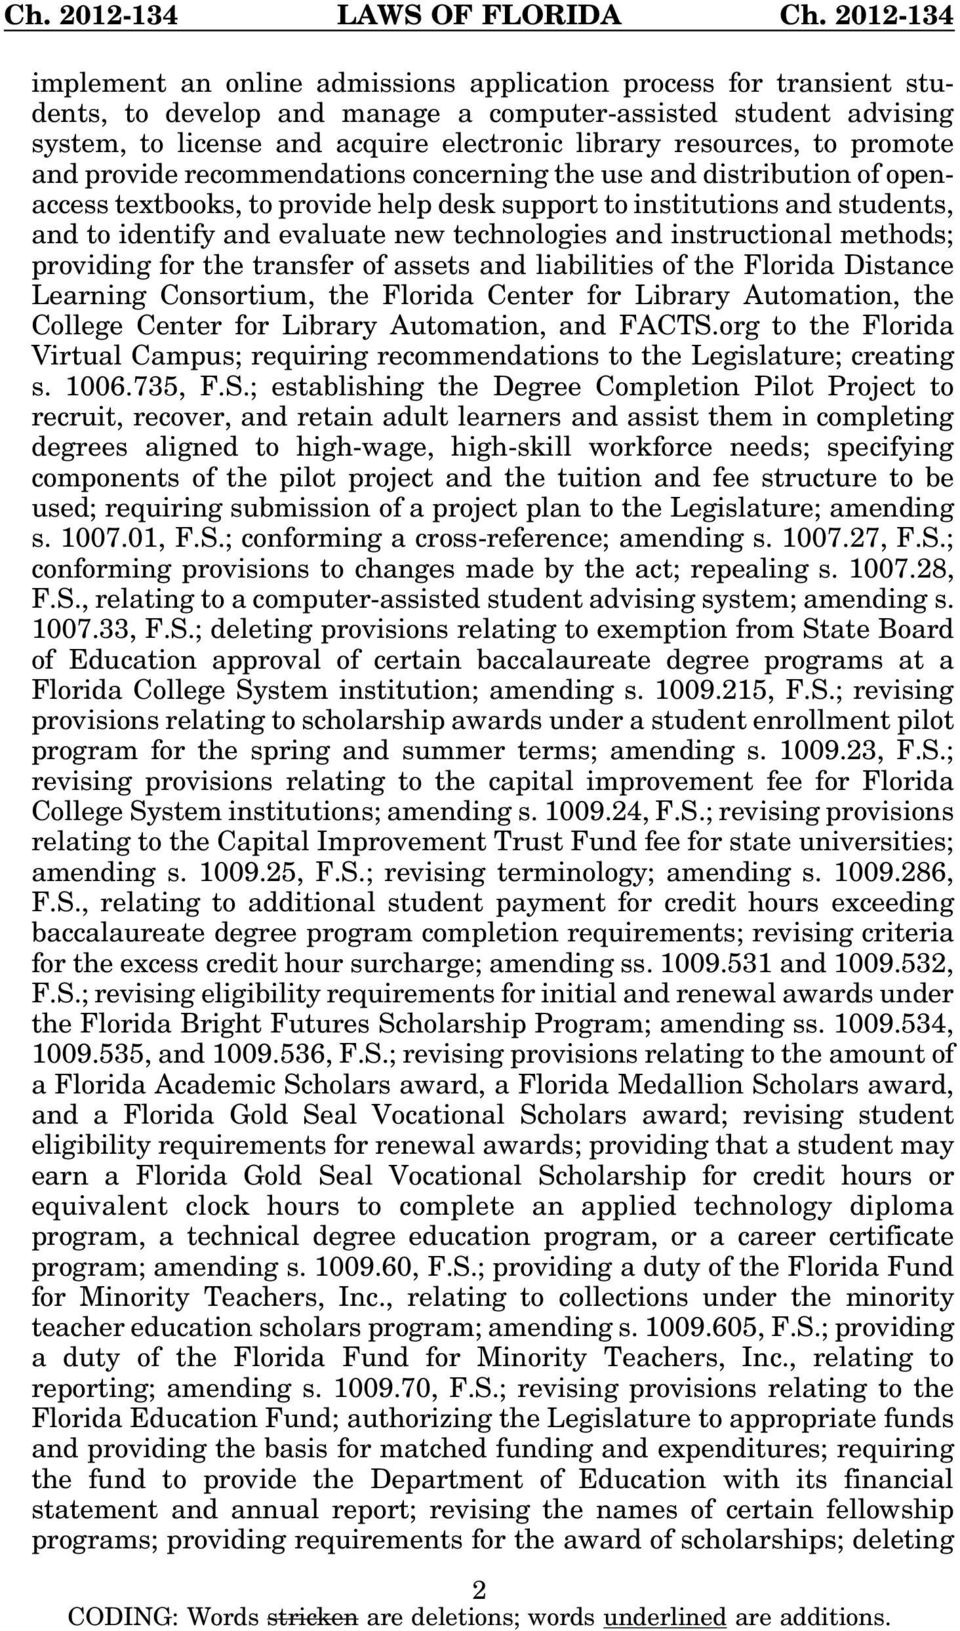 technologies and instructional methods; providing for the transfer of assets and liabilities of the Florida Distance Learning Consortium, the Florida Center for Library Automation, the College Center